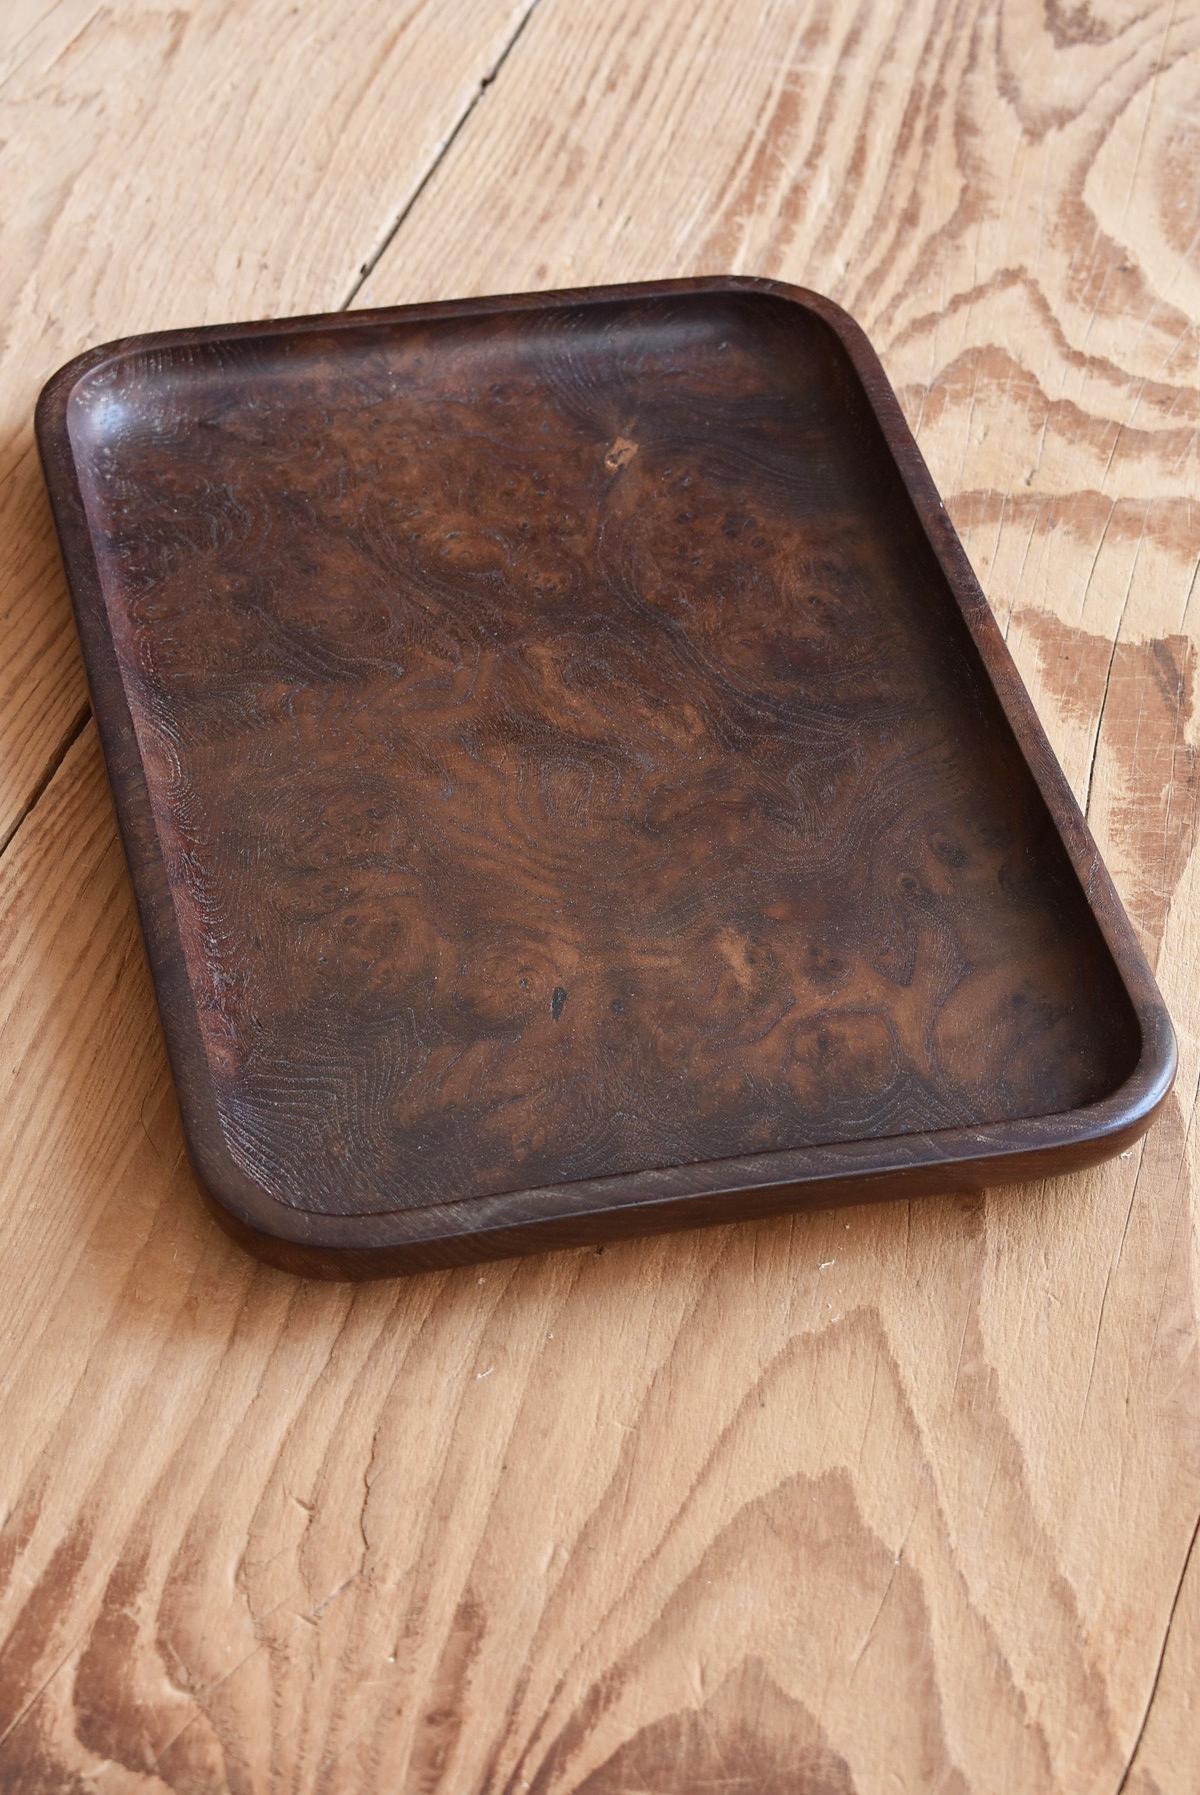 Woodwork Luxury Japanese Old Trays Made of Mulberry Wood / Vintage Wooden Trays / Showa